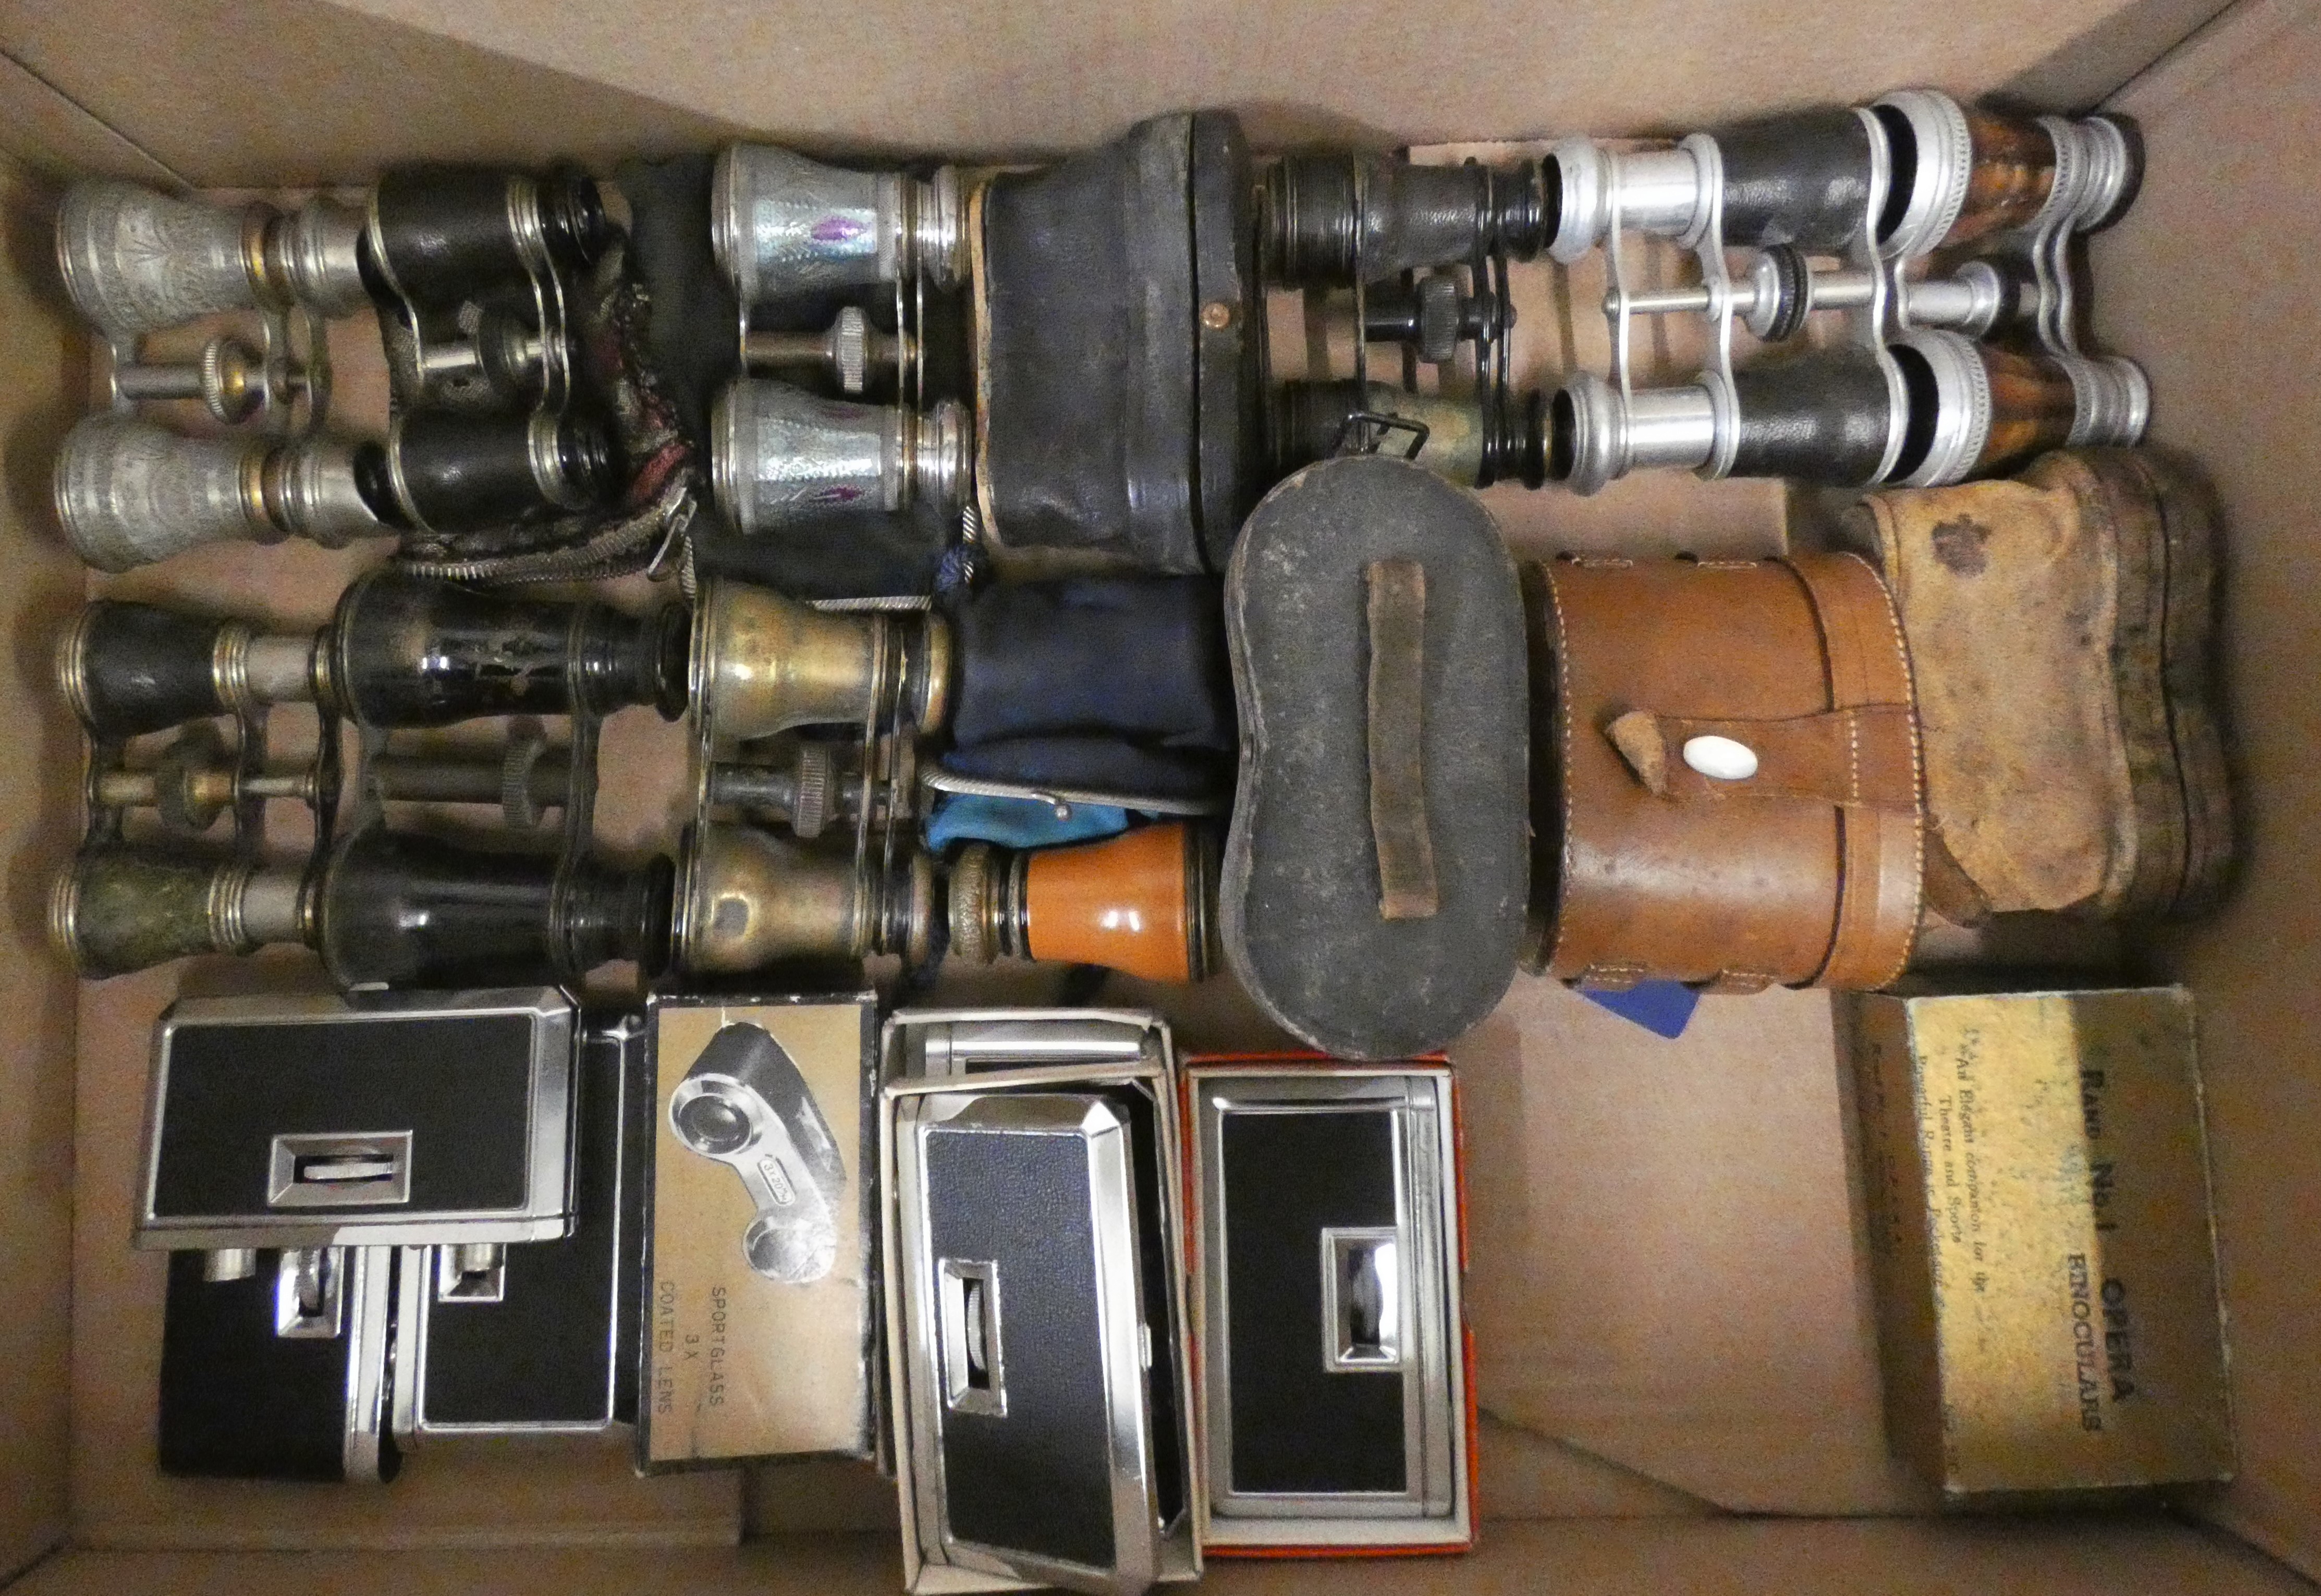 Fourteen pairs of un-named Opera glasses and 8 pairs of Opera binoculars, some cased.